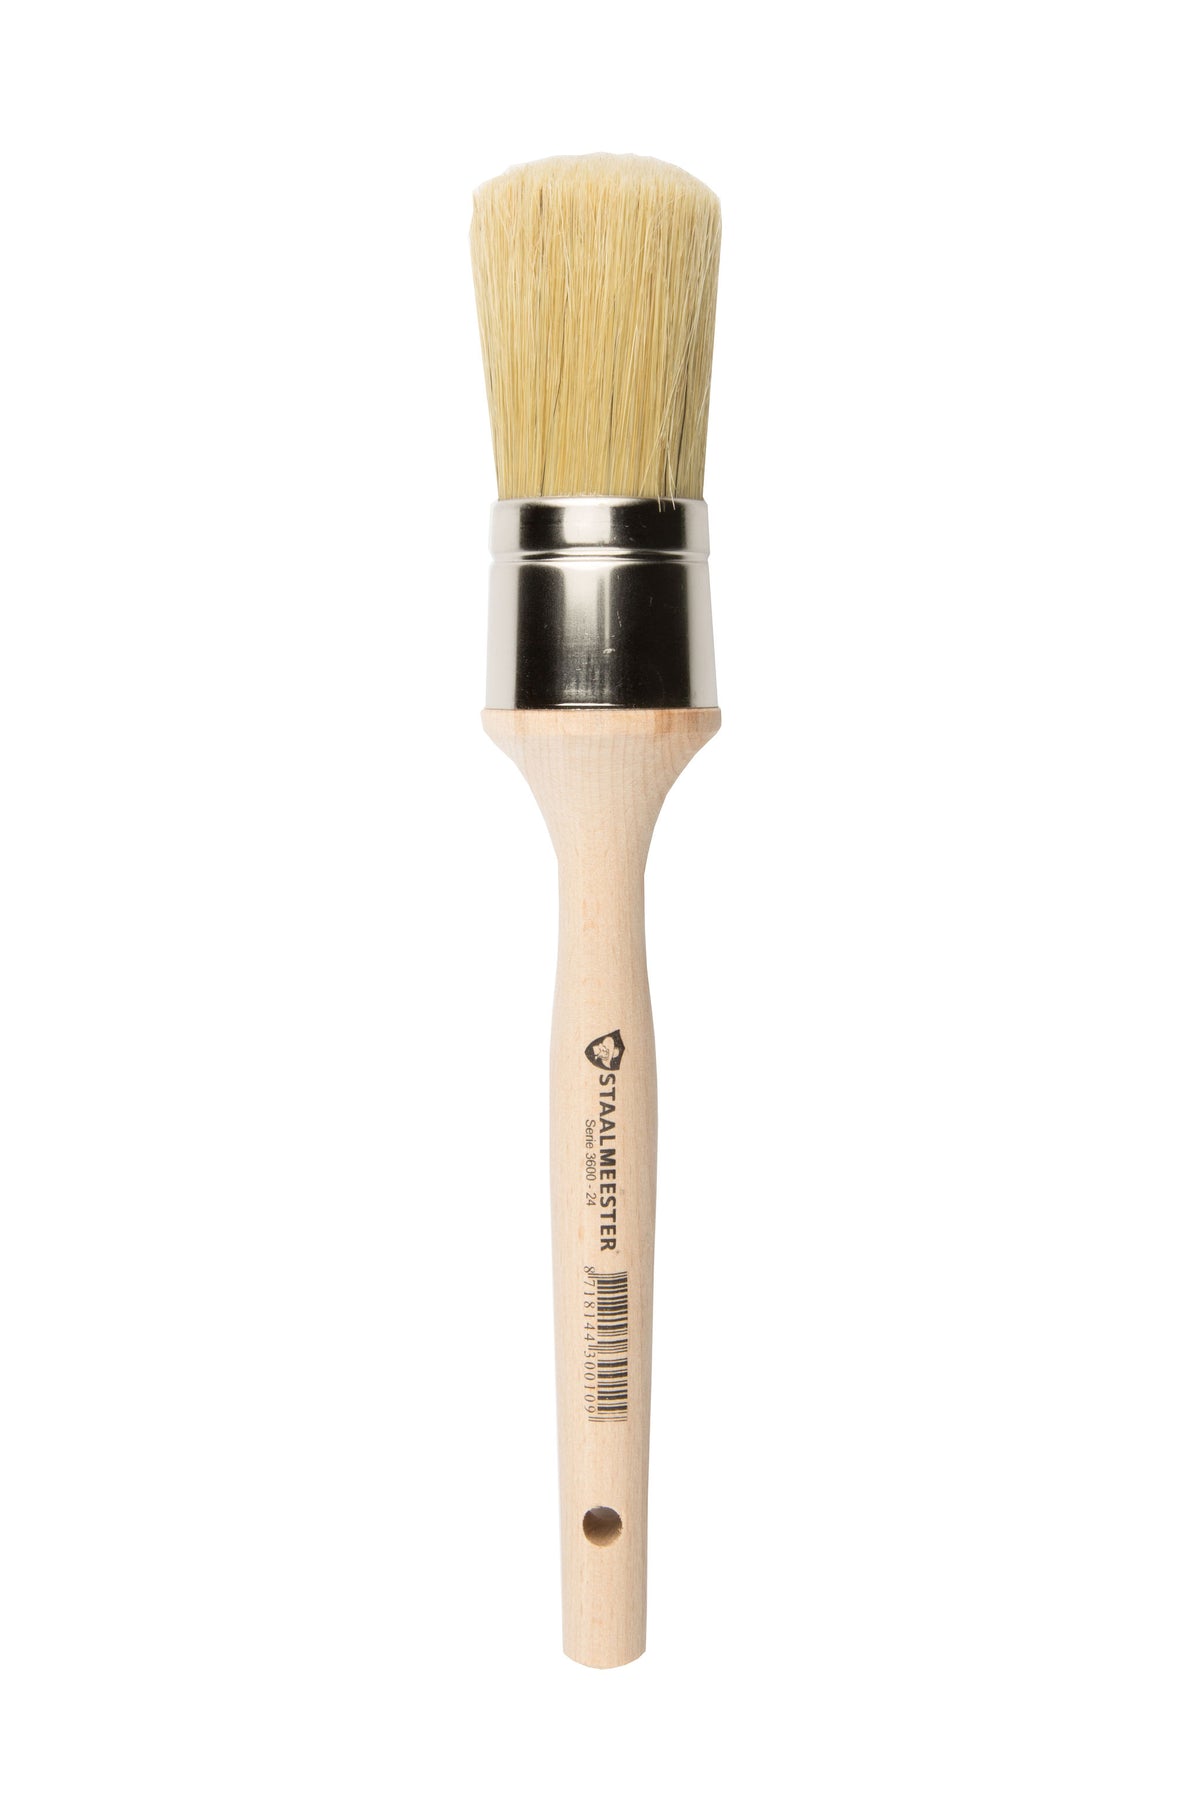 Staalmeester Brushes-Round Wax